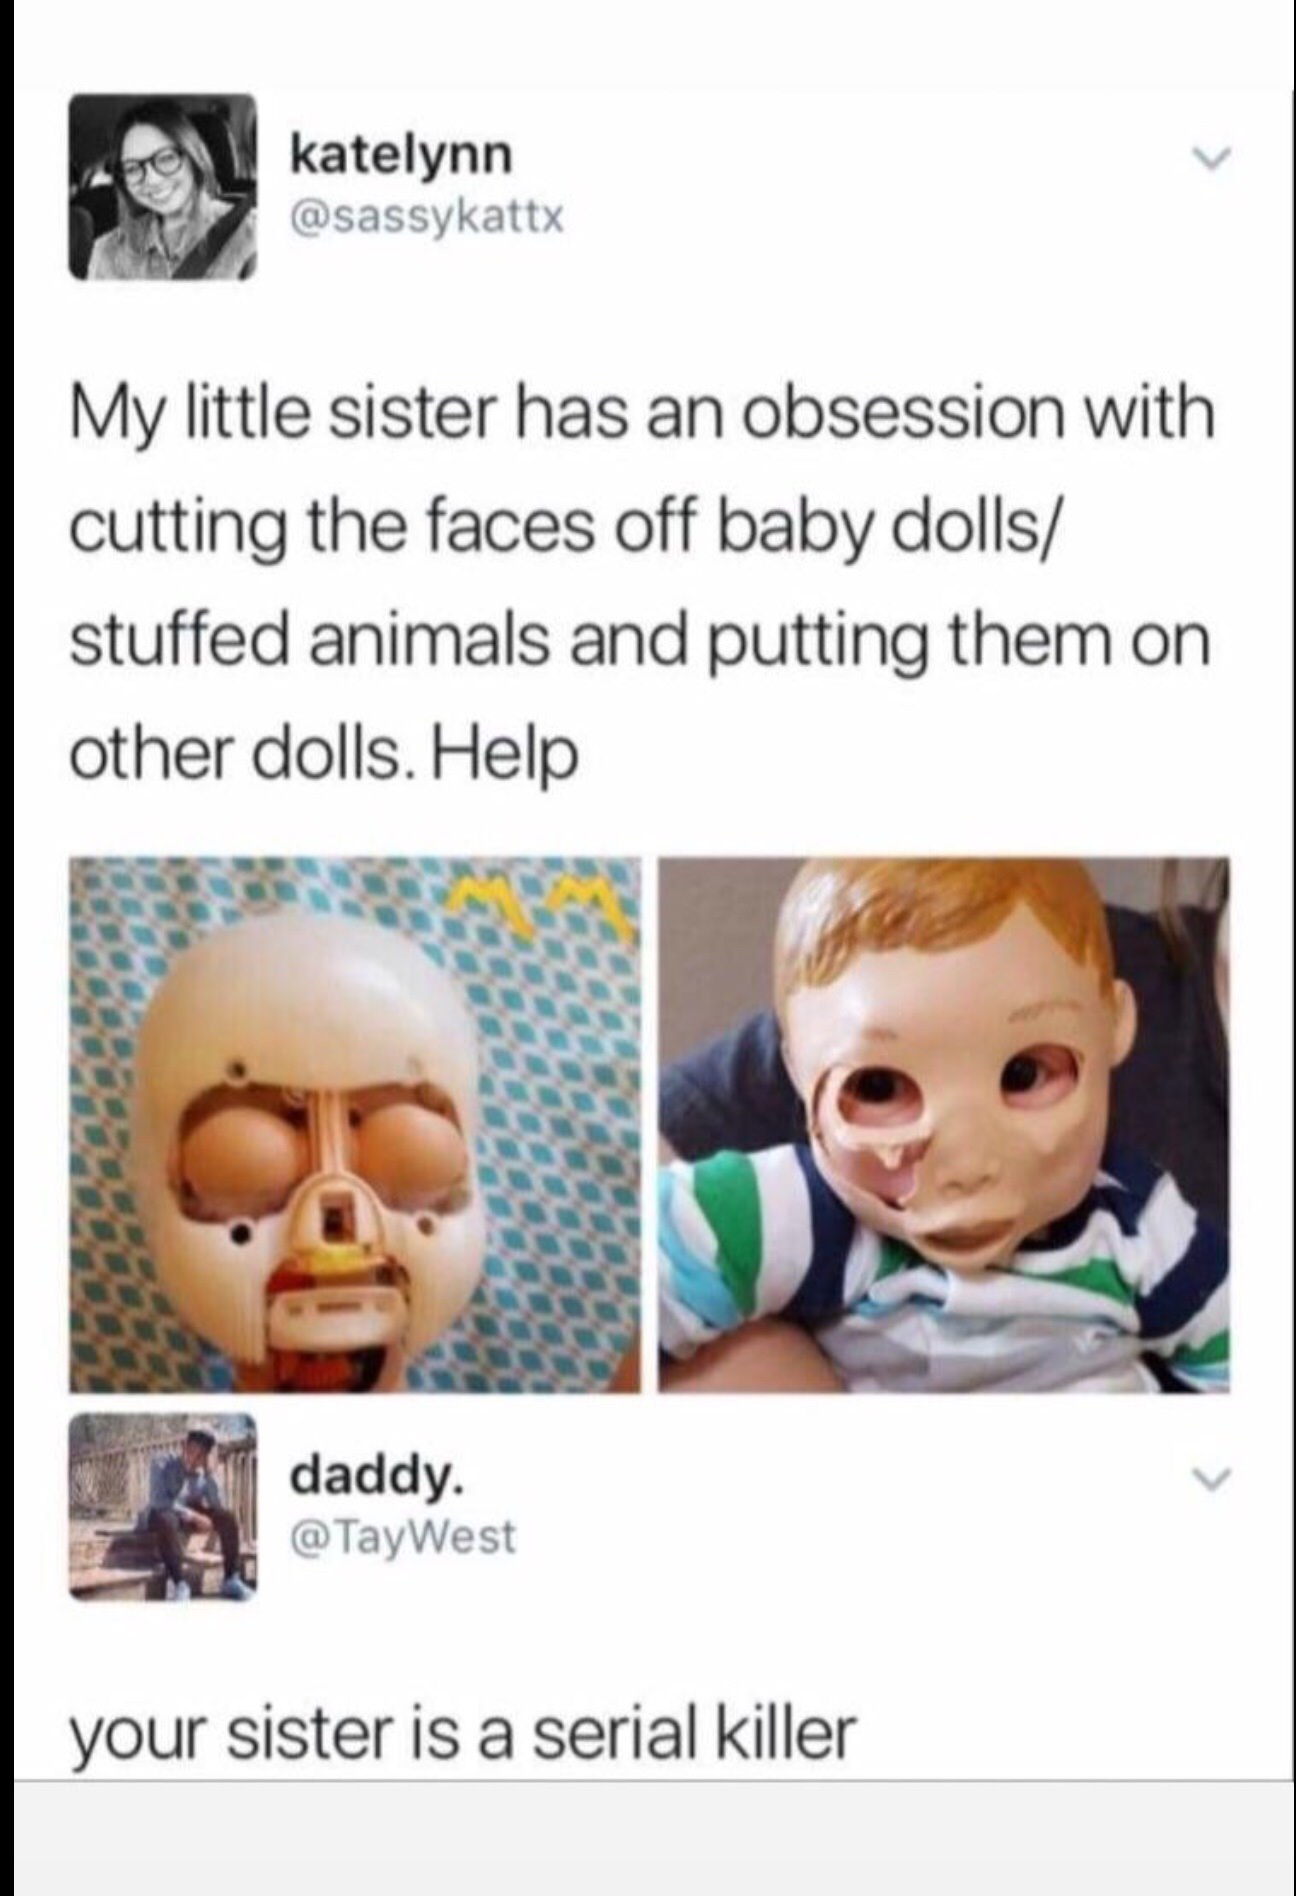 funny psychopath meme - katelynn My little sister has an obsession with cutting the faces off baby dolls stuffed animals and putting them on other dolls. Help daddy. your sister is a serial killer